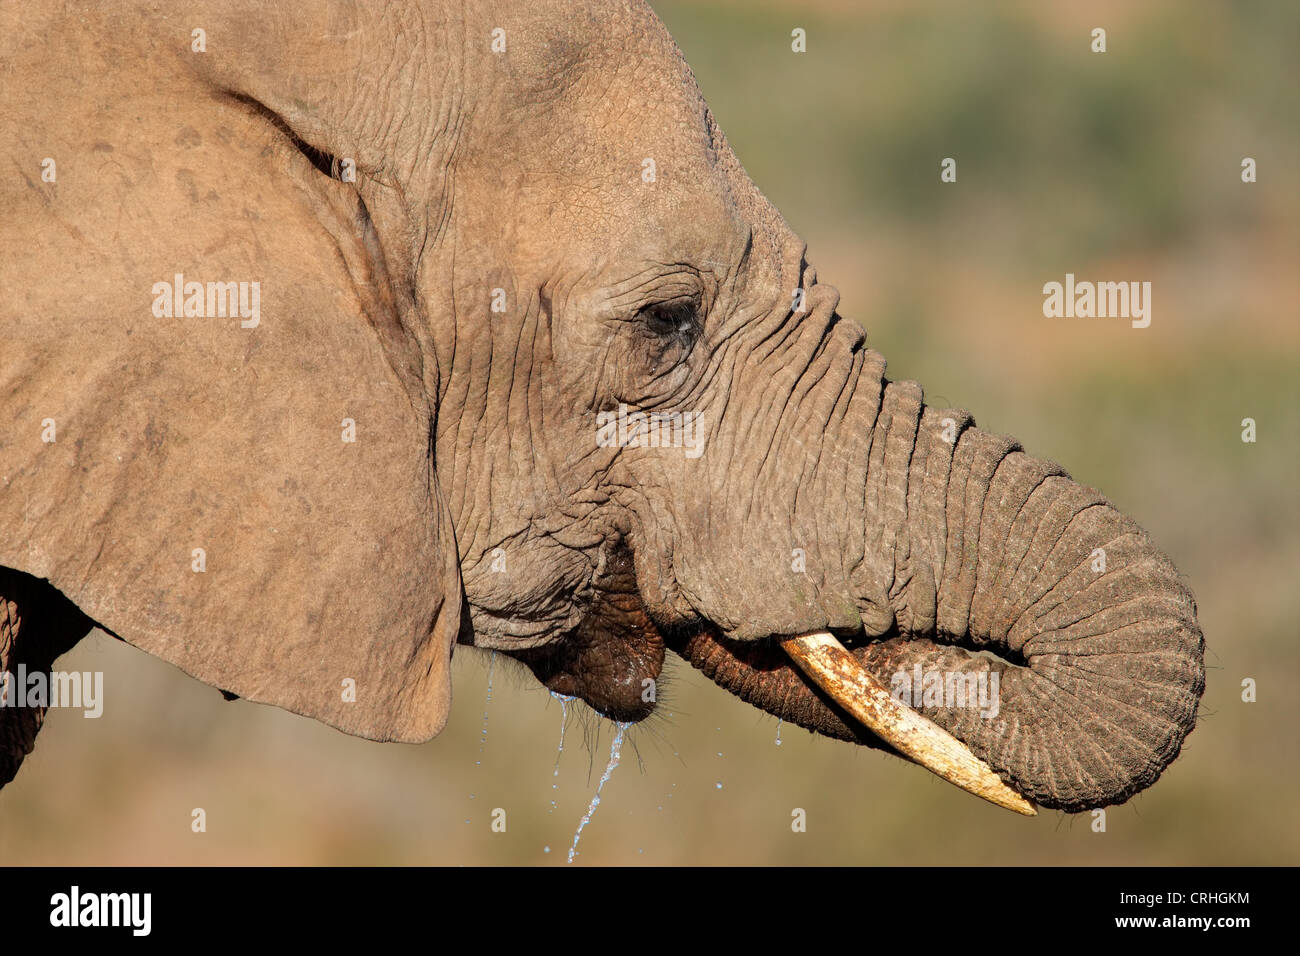 Portrait of an African elephant (Loxodonta africana) drinking water, South Africa Stock Photo